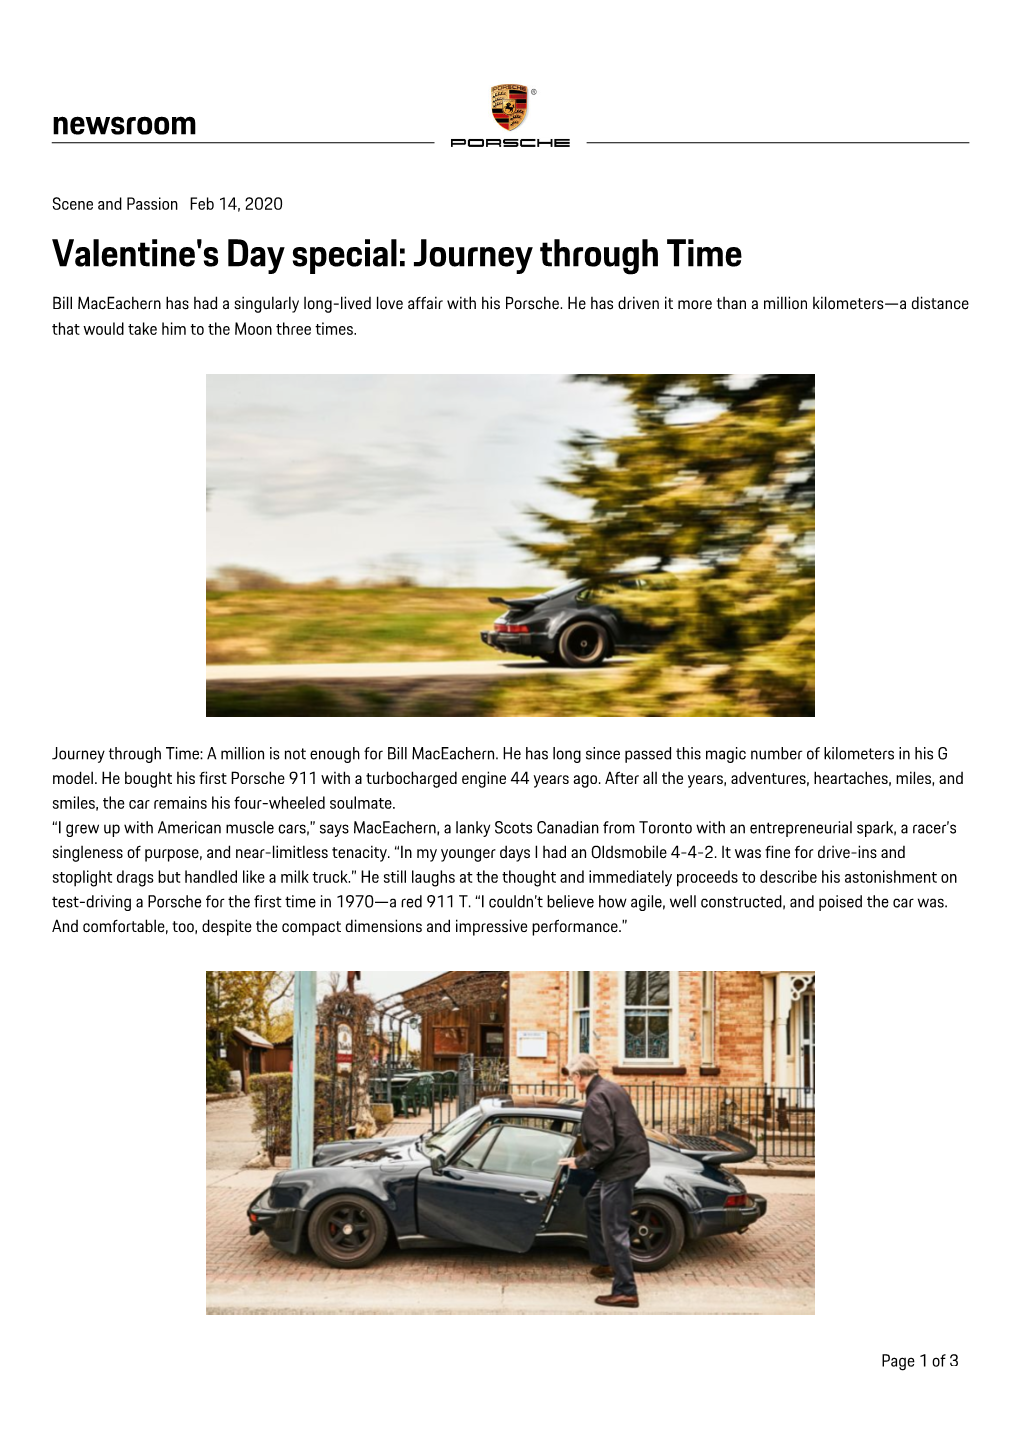 Valentine's Day Special: Journey Through Time Bill Maceachern Has Had a Singularly Long-Lived Love Affair with His Porsche